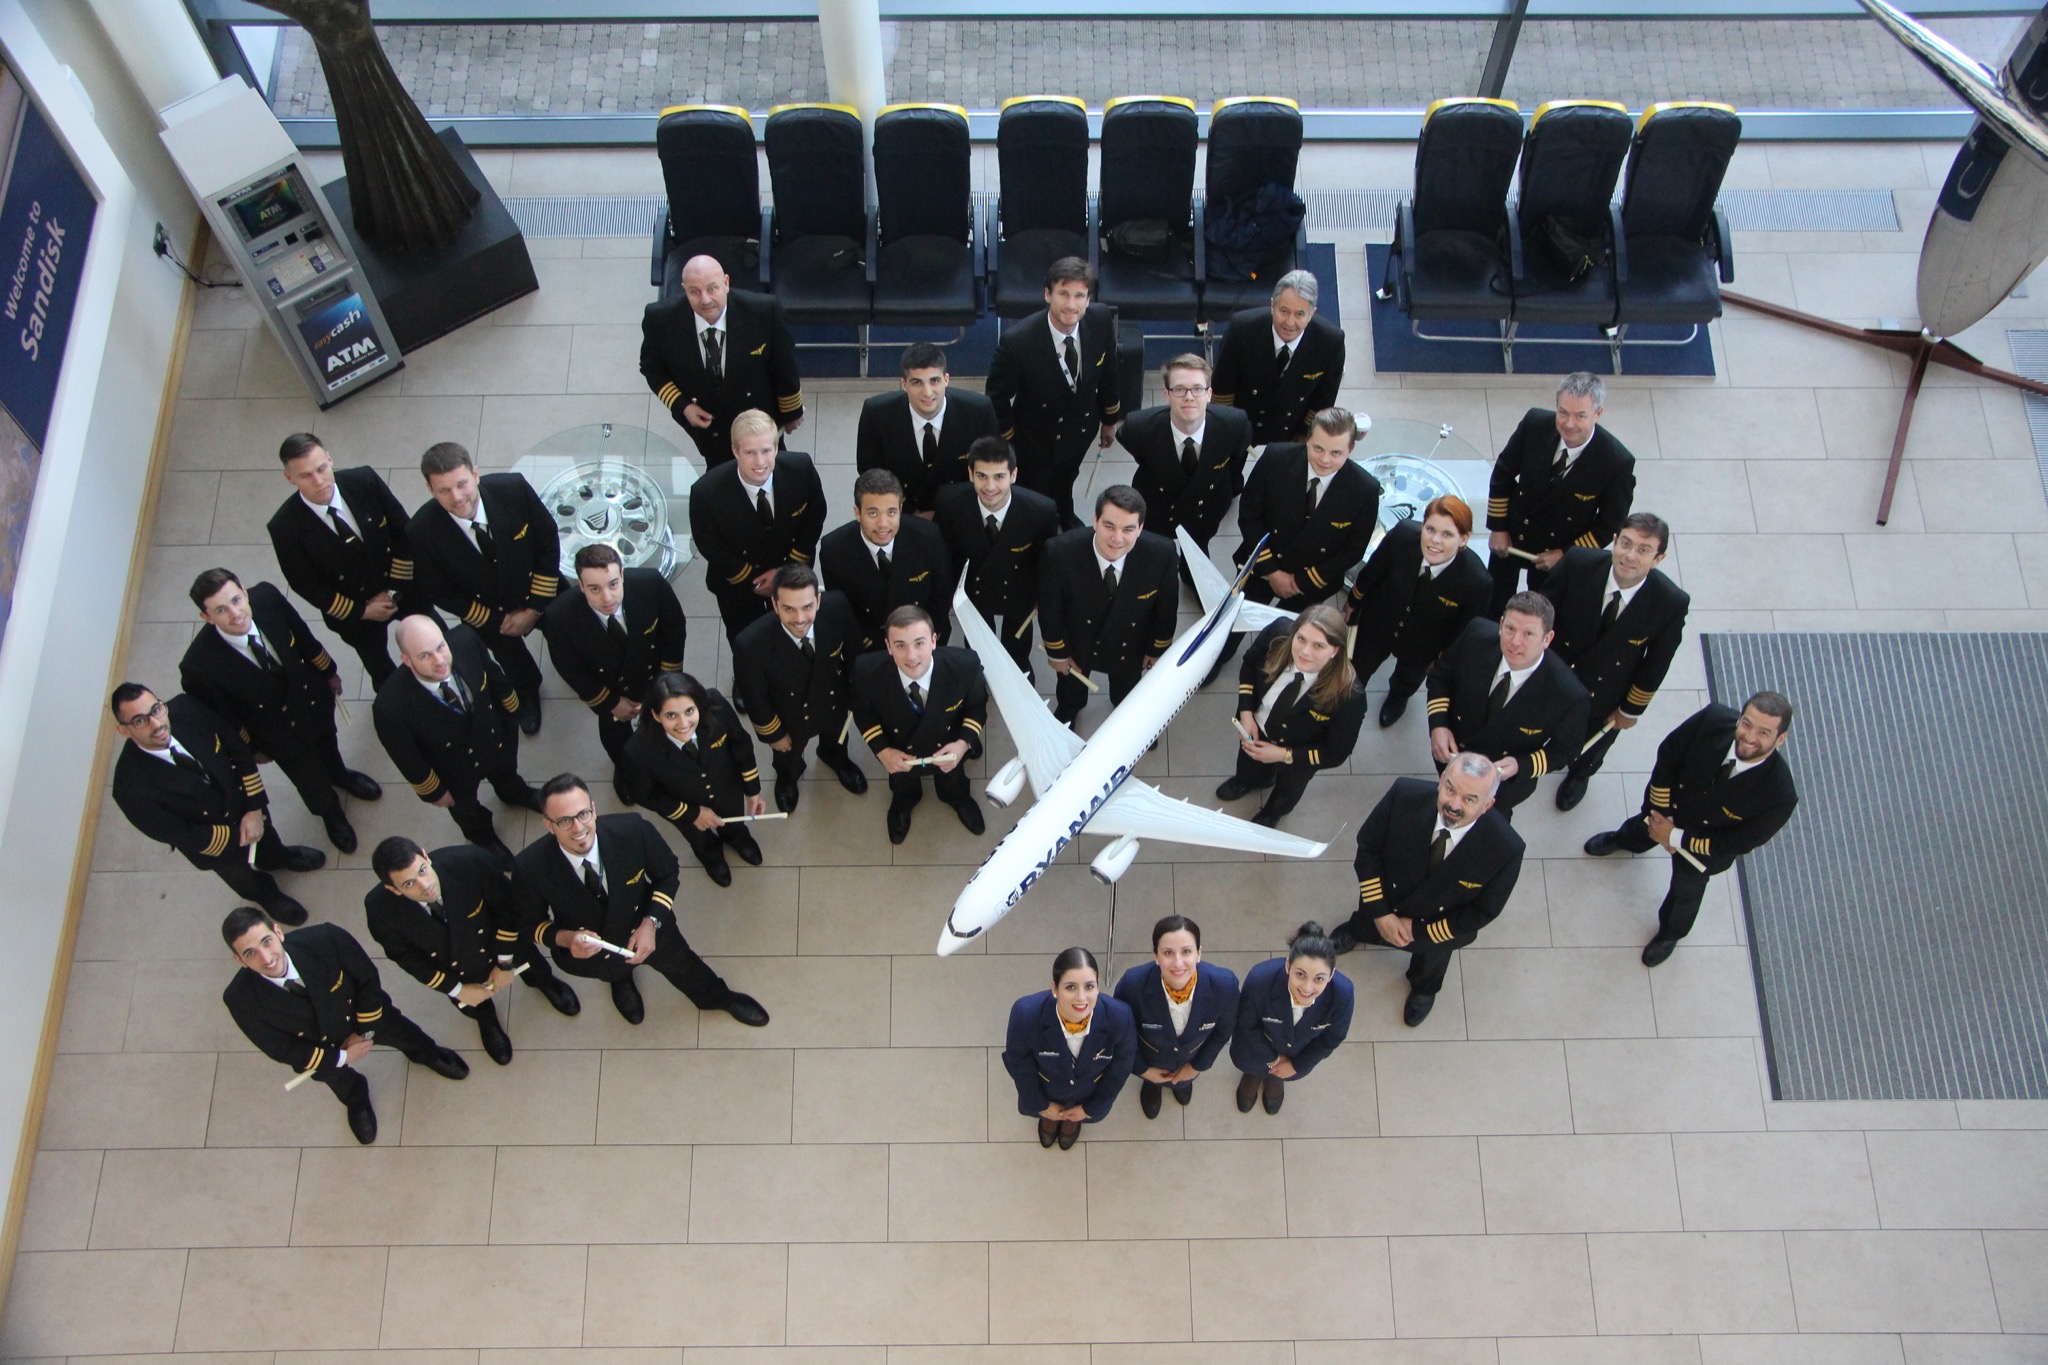 17 May – Another 26 Pilots Join Ryanair This Week | Ryanair's Corporate ...